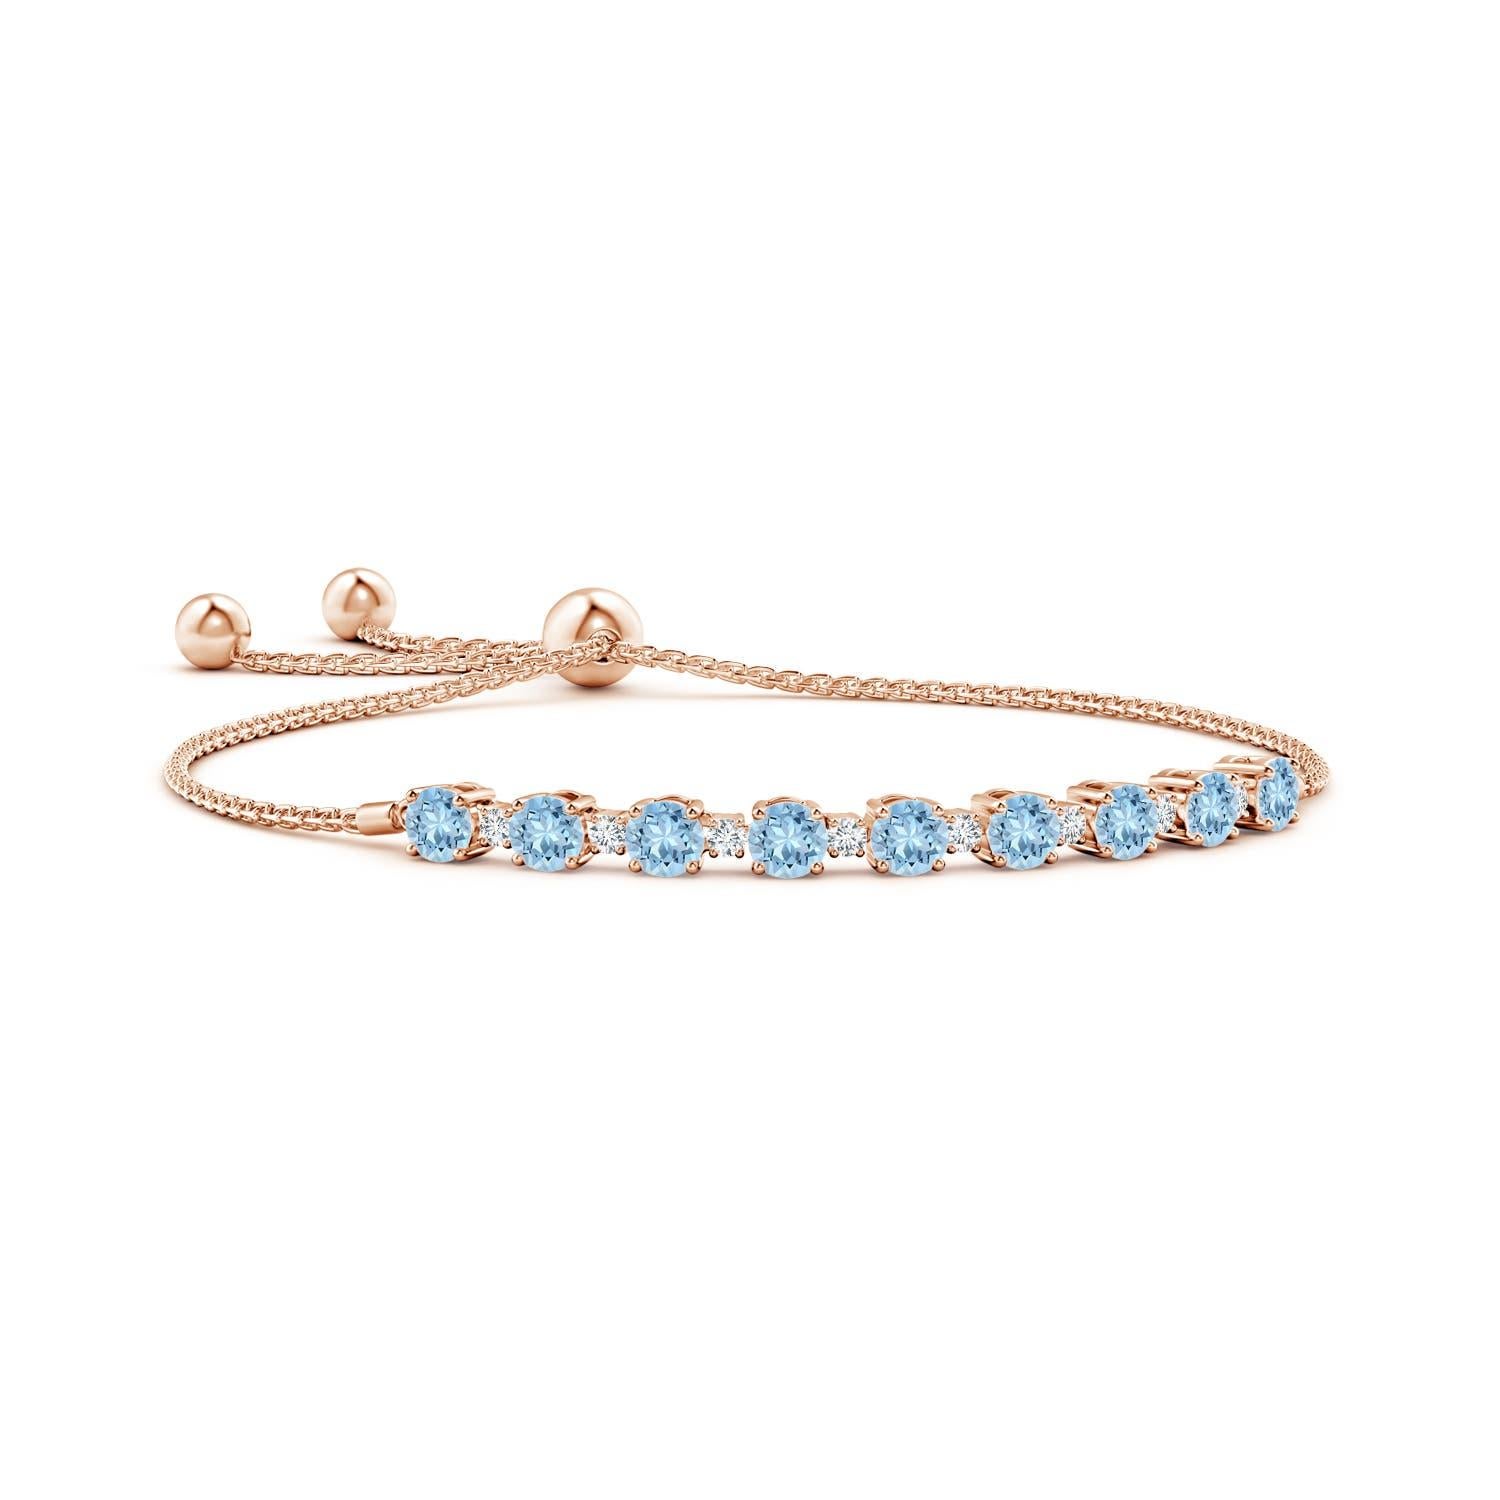 Sea blue aquamarines and glittering diamonds come together on this 14k rose gold tennis bolo bracelet. They are prong set alternately and create a classic look. This bracelet is adjustable to fit most wrists.